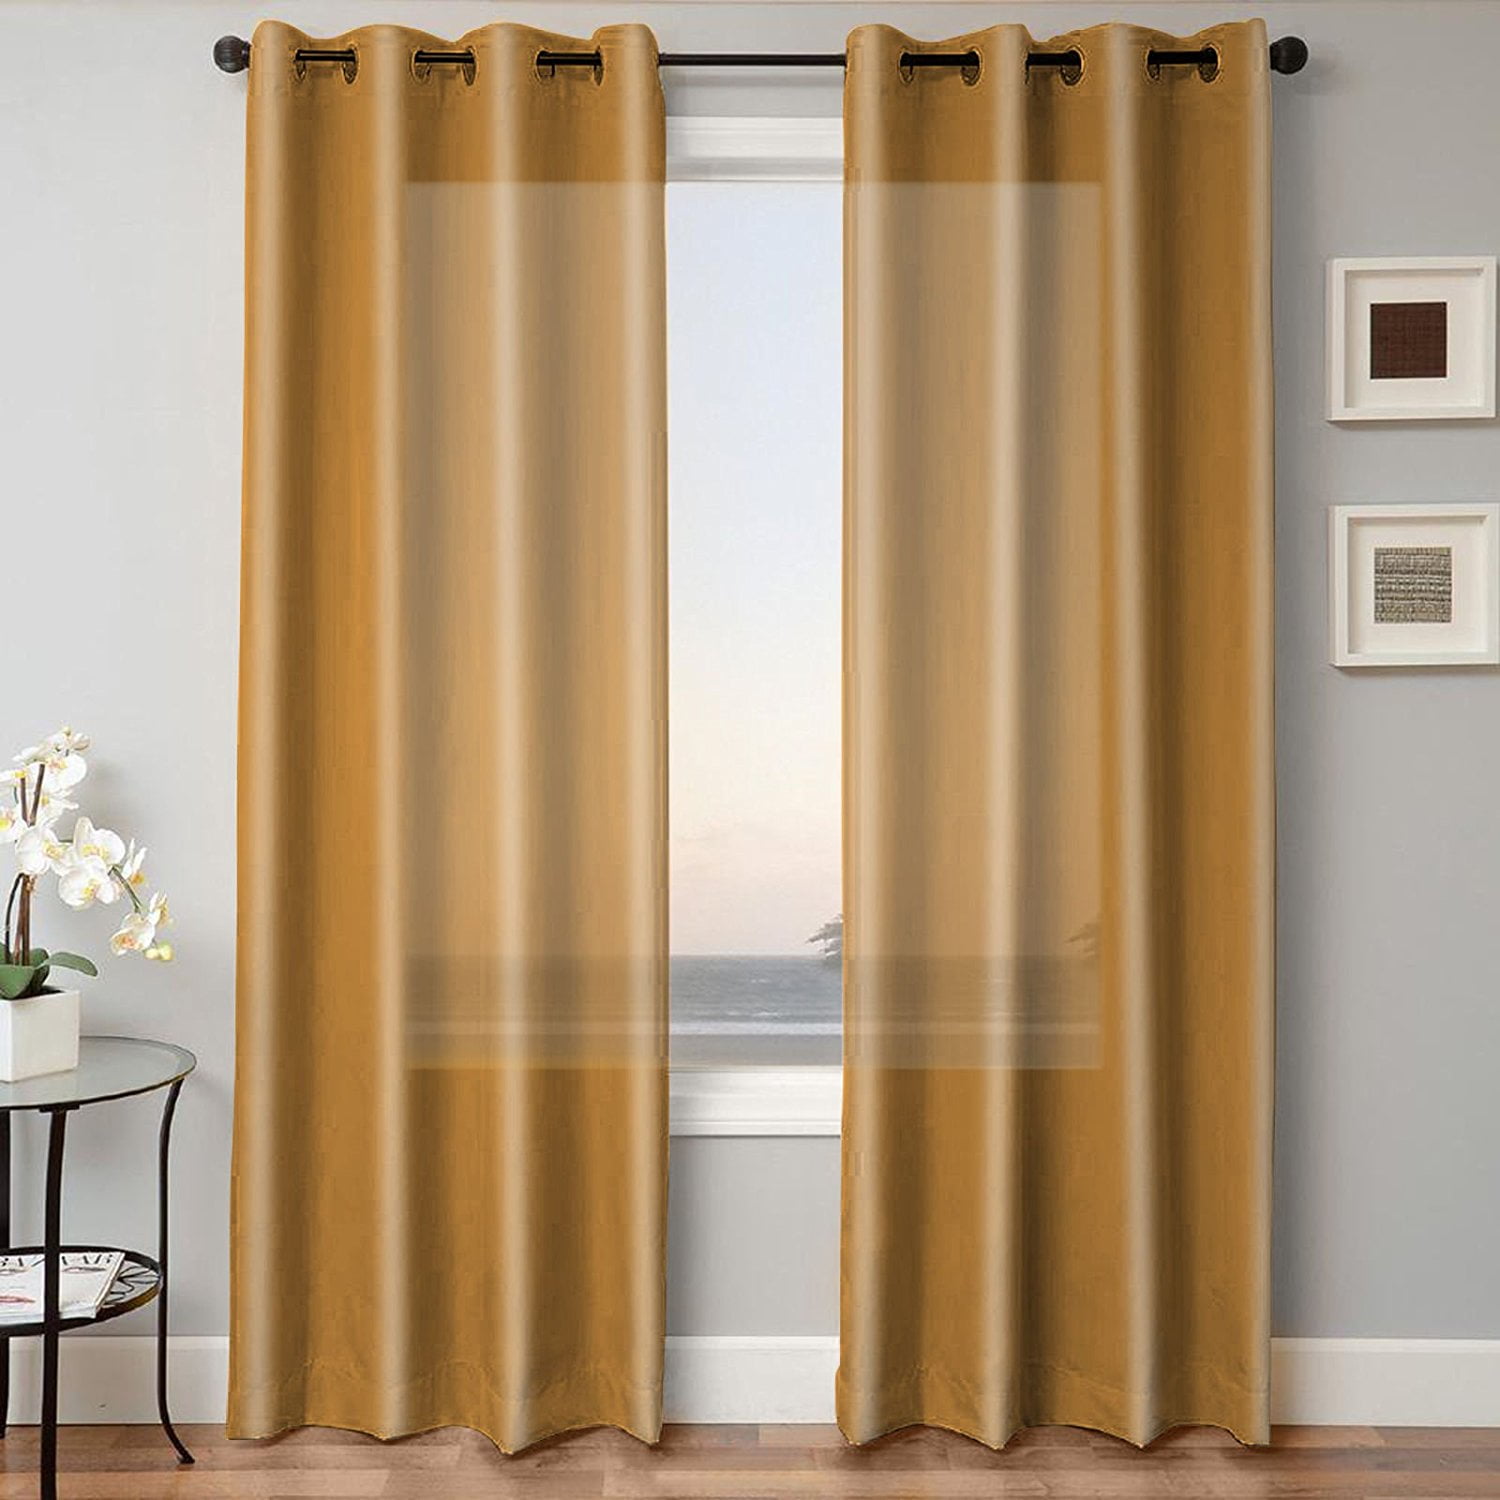 SOLID GROMMET FAUX  SILK WINDOW CURTAIN PANEL DRAPE 63 84 95 108 MANY COLOR MIRA 